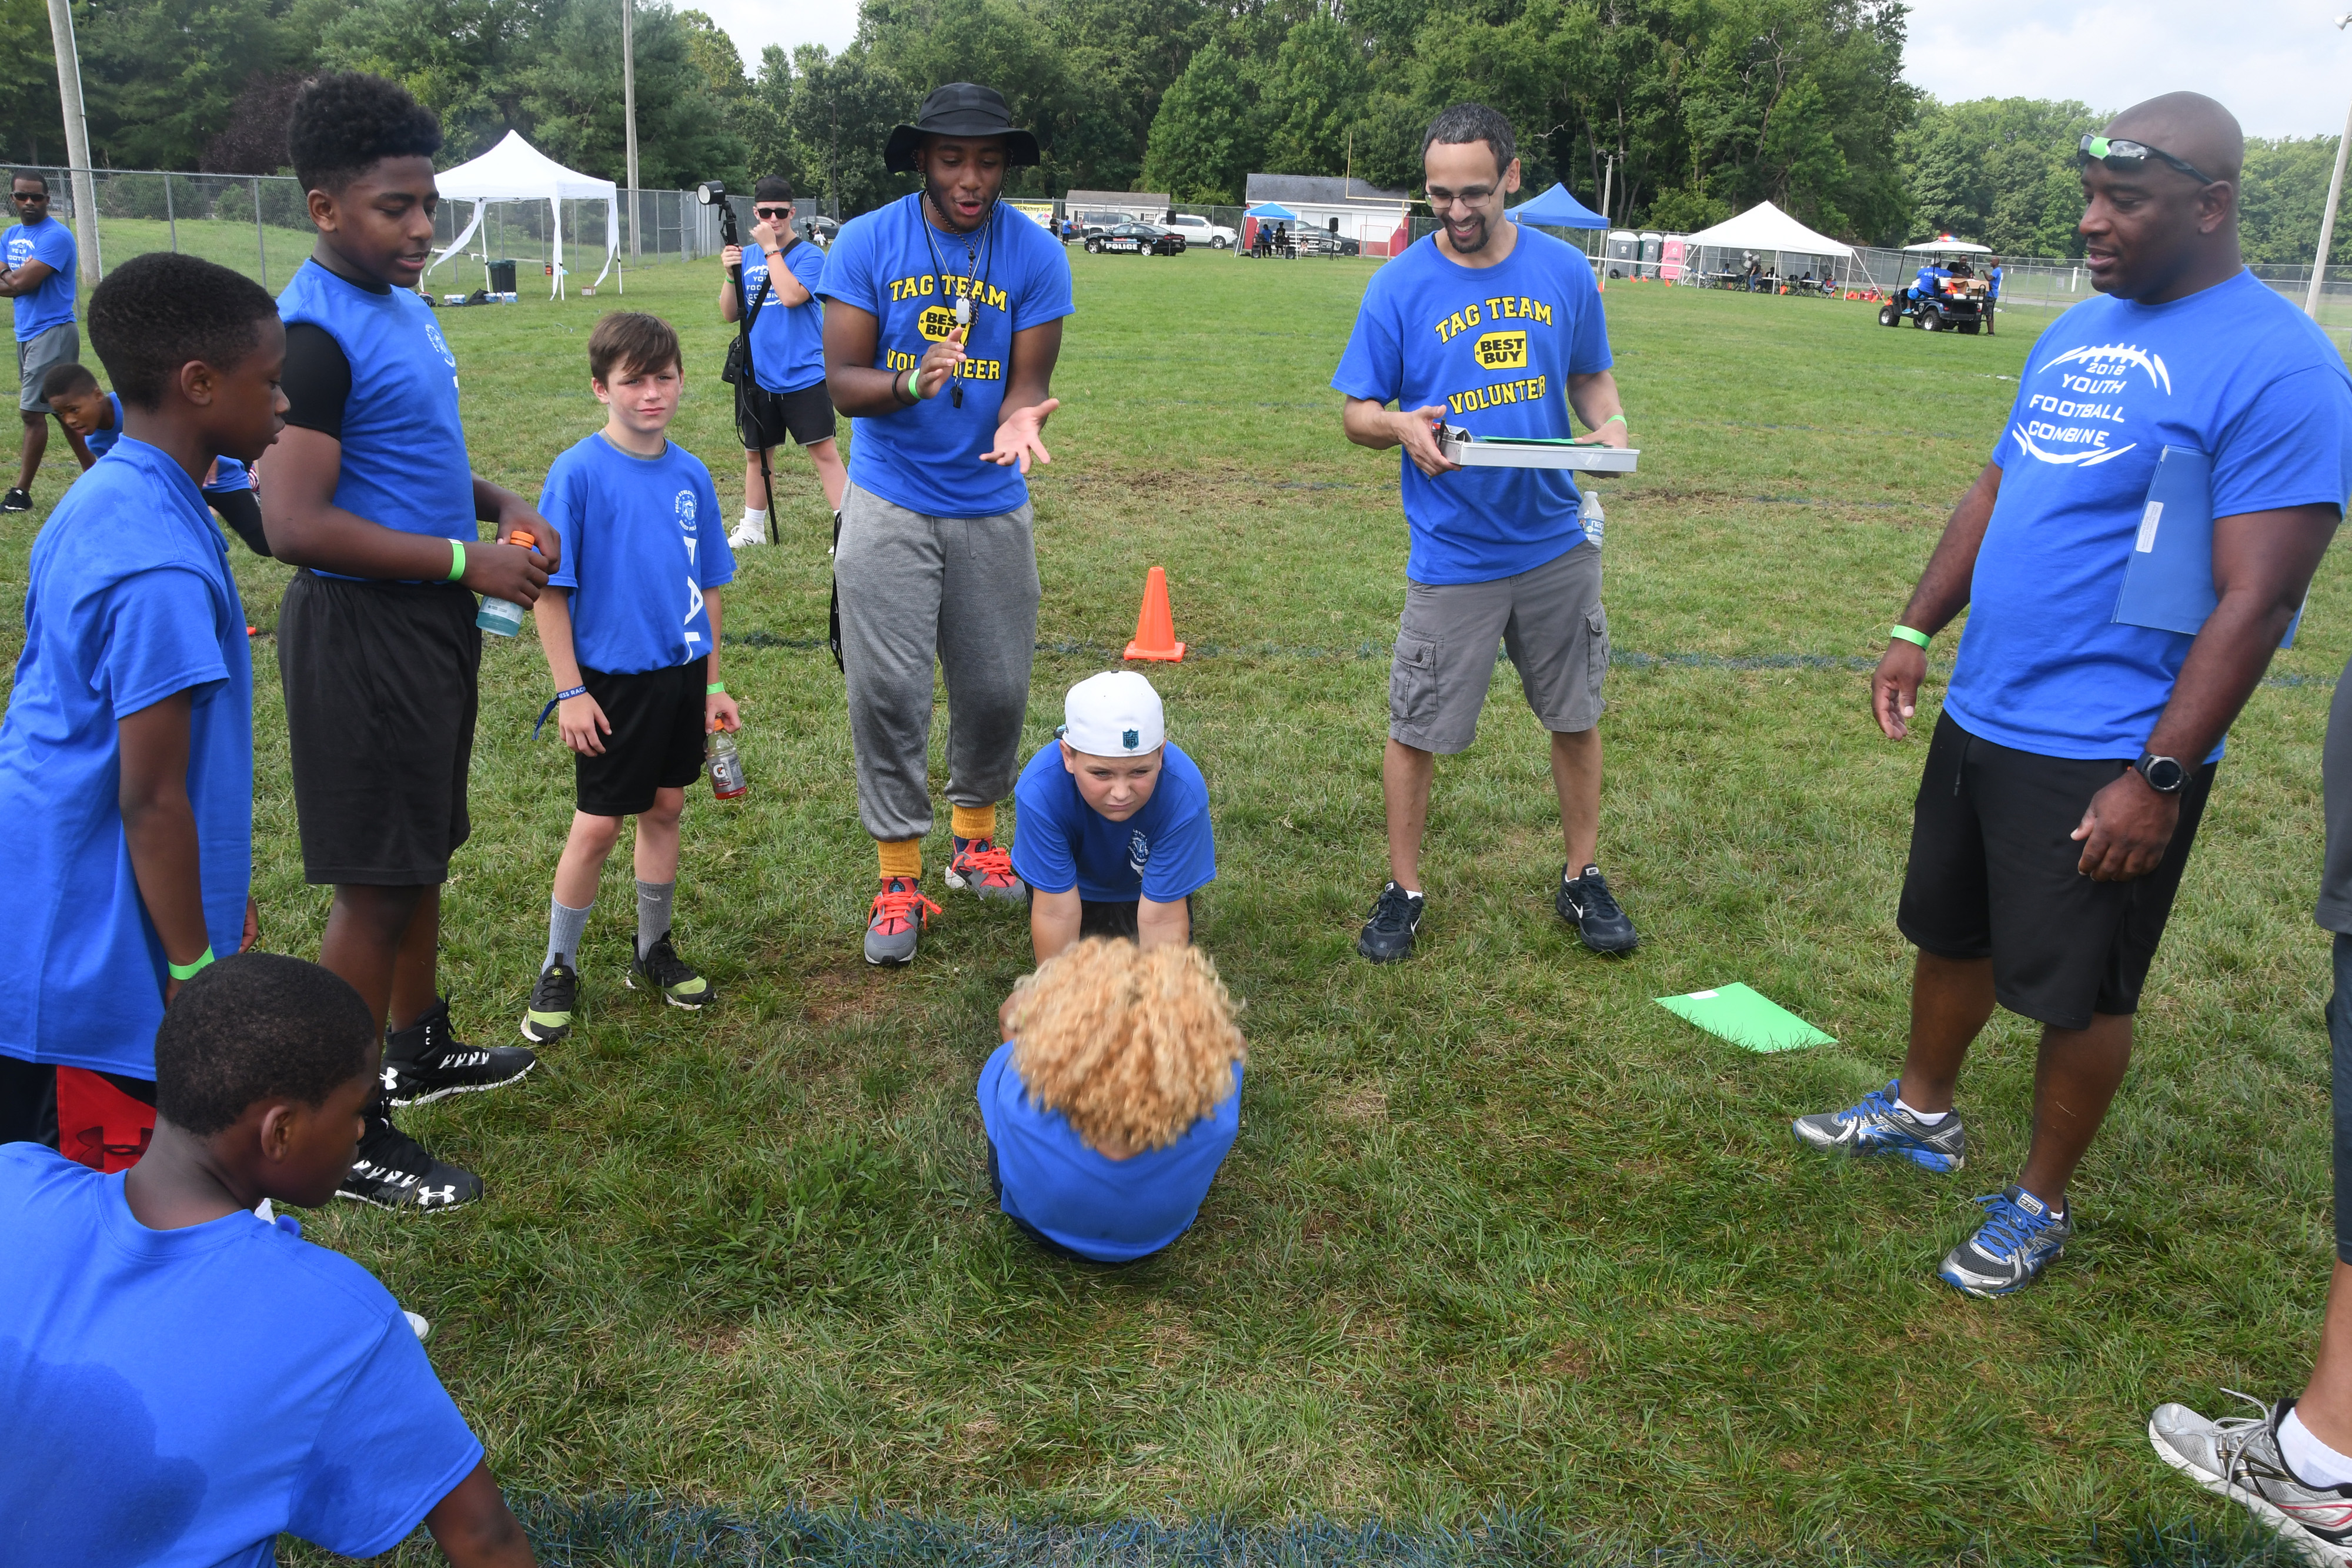 DSP-DSU volunteers and participants urge on a youth in his sit-up exercise efforts.